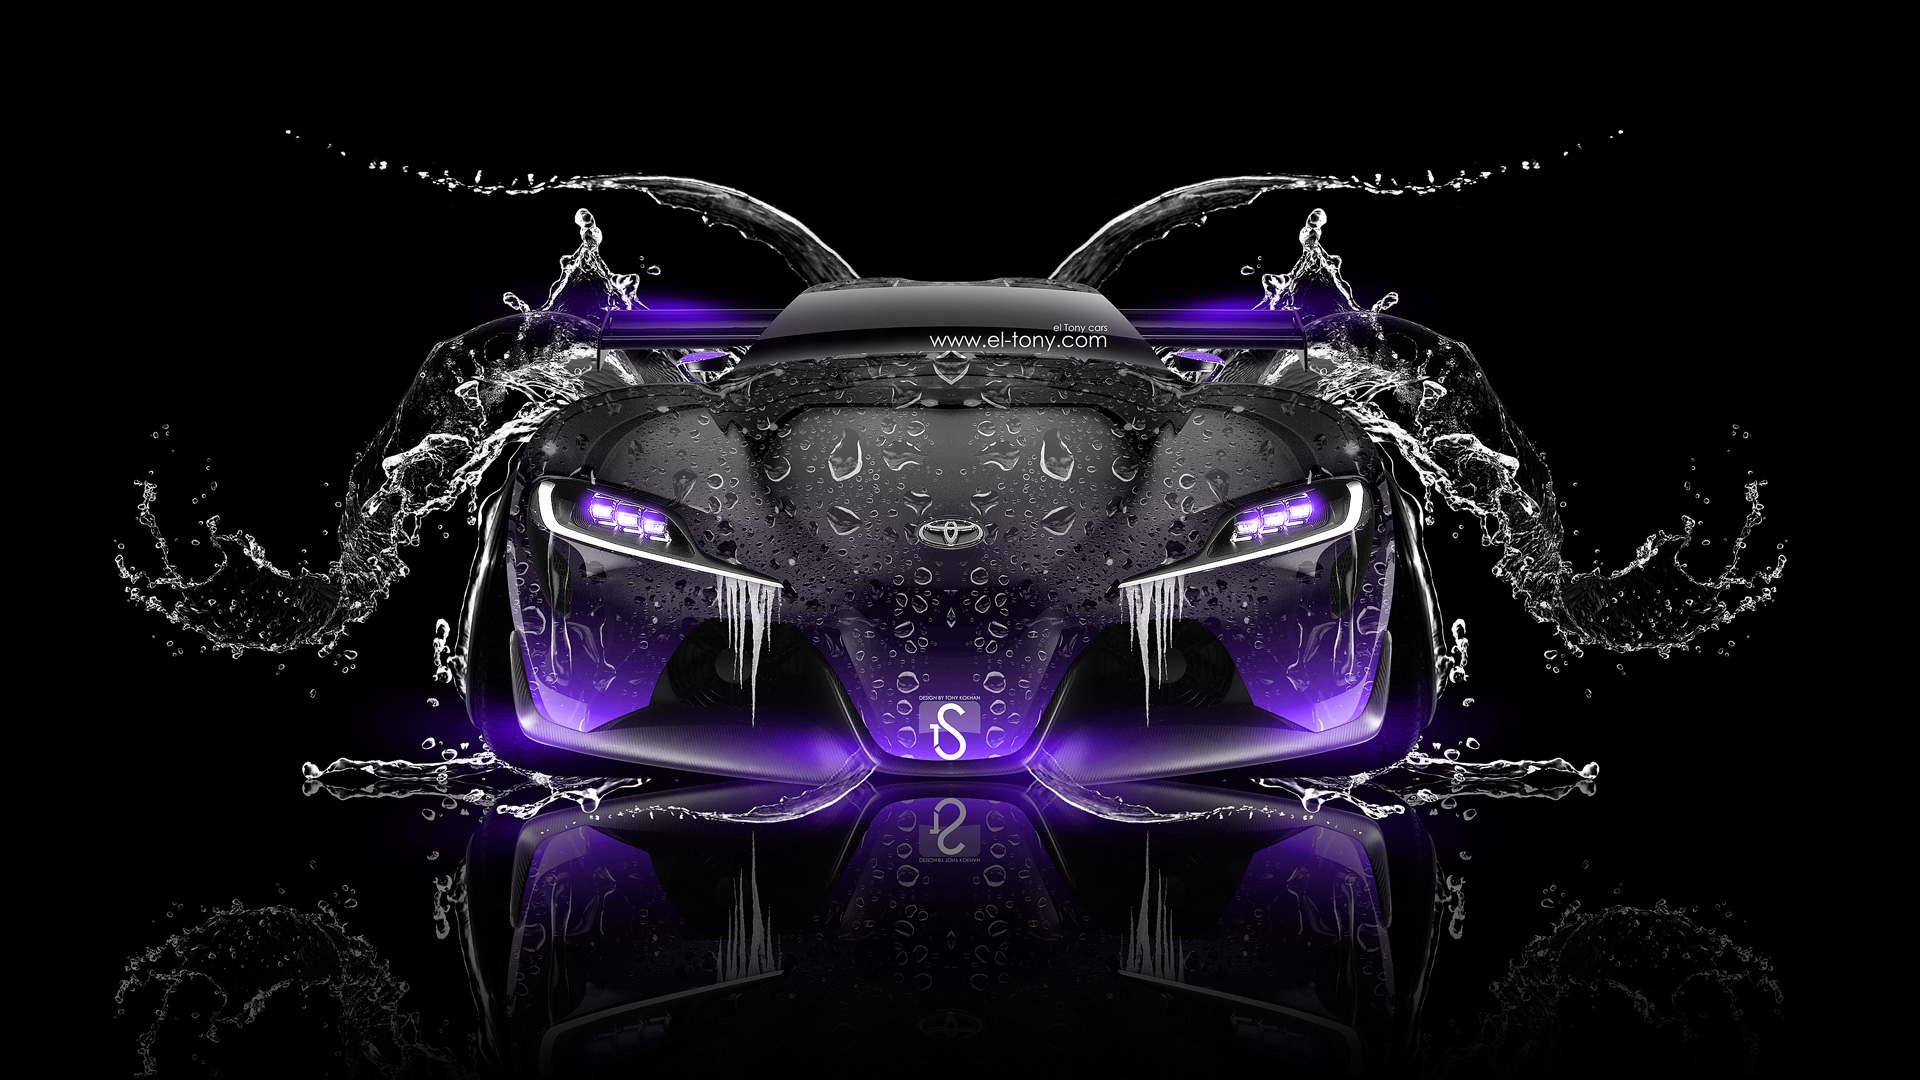 Toyota-FT-1-Tuning-Fron-Water-Car-2014-Violet-Neon-HD-Wallpapers-design-by-Tony-Kokhan-www.el-to.jpg